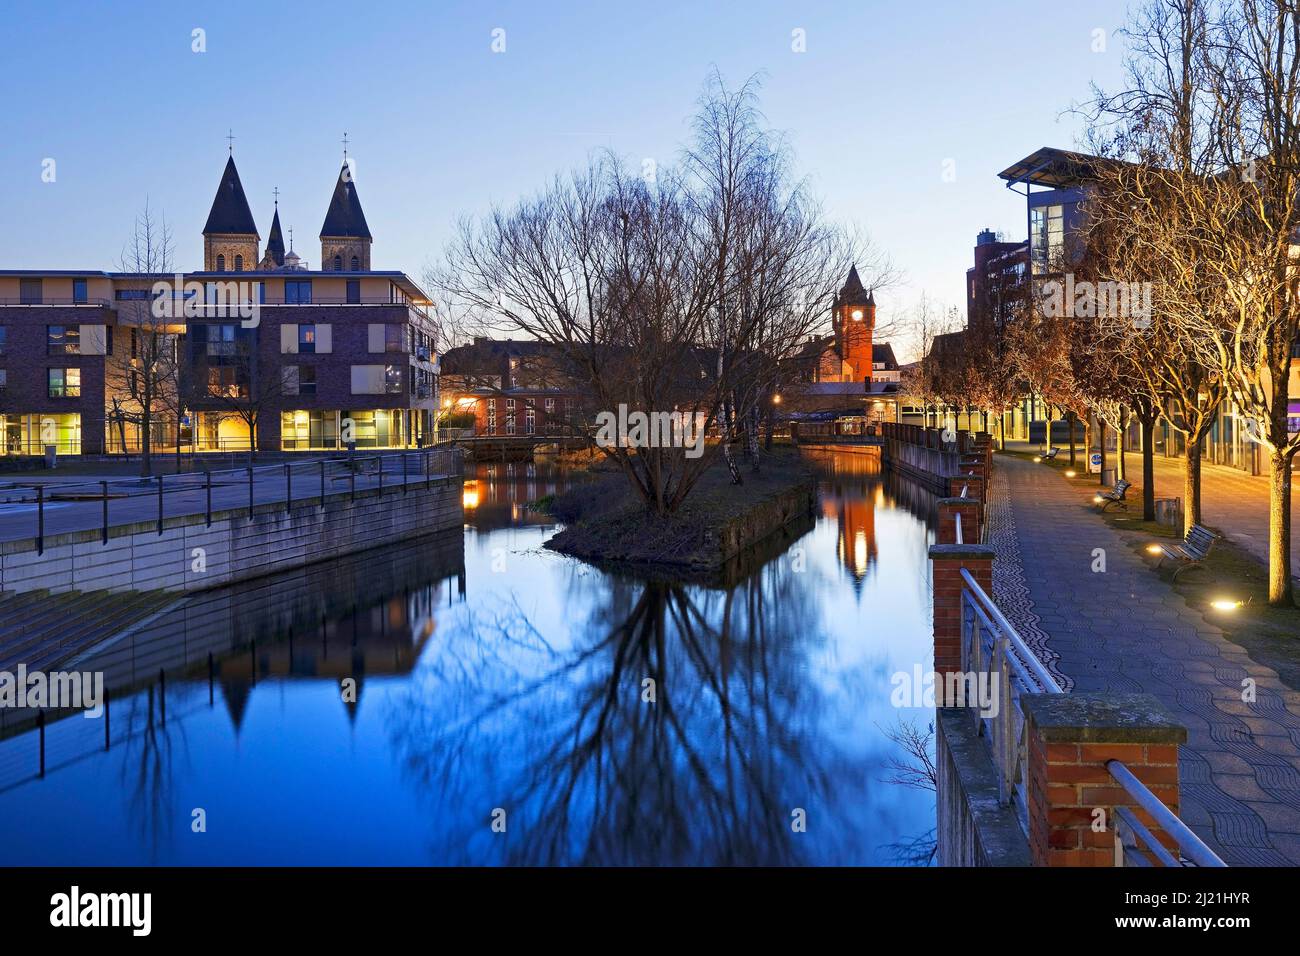 Church St. Antonius and old town hall tower with river Dinkel in the evening, Germany, North Rhine-Westphalia, Muensterland, Gronau Stock Photo